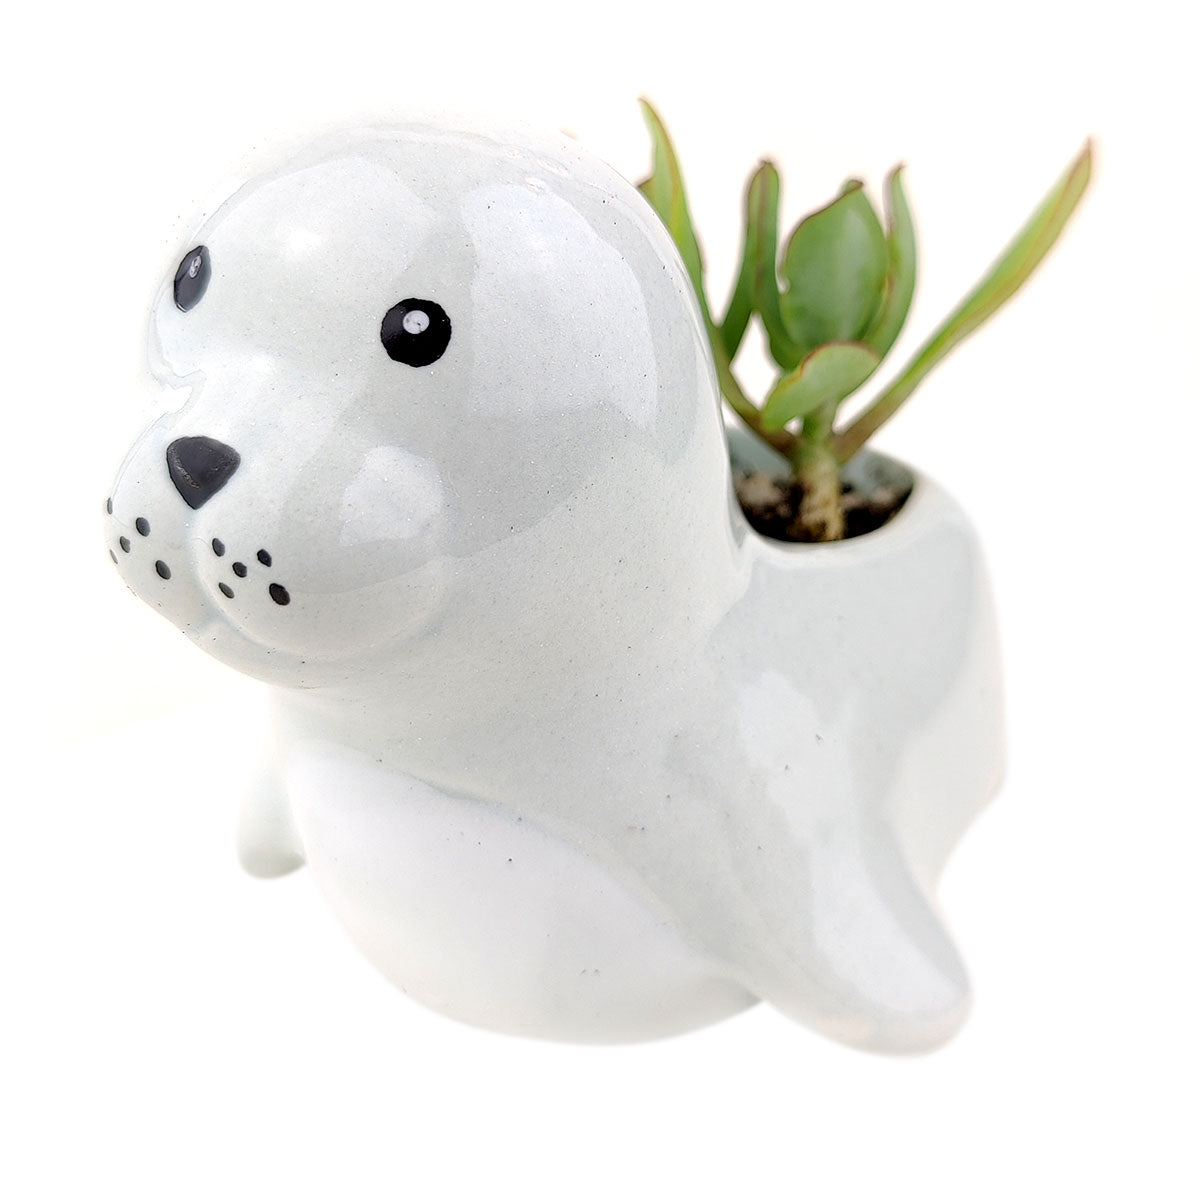 Sea Lion Pot for sale, Ceramic mini pot for succulents and flowers, Ceramic Sea Lion Flower Pot, Cute succulent planter, ideal gifts for mom